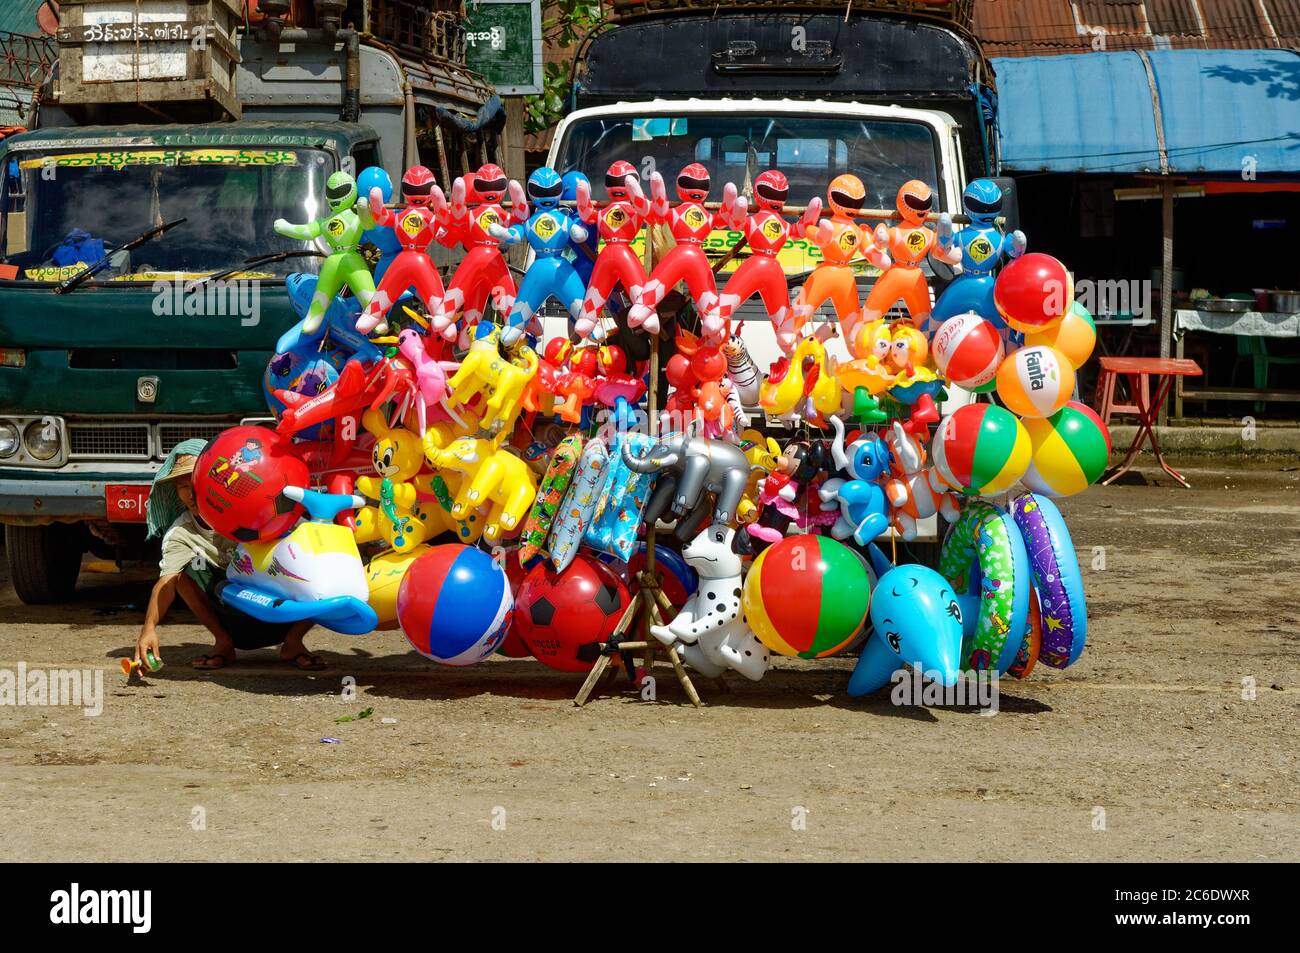 Blow up toys and souvenirs at a market in Yangon, Myanmar, including beach balls, Power Rangers and yellow elephant ballooons. Stock Photo